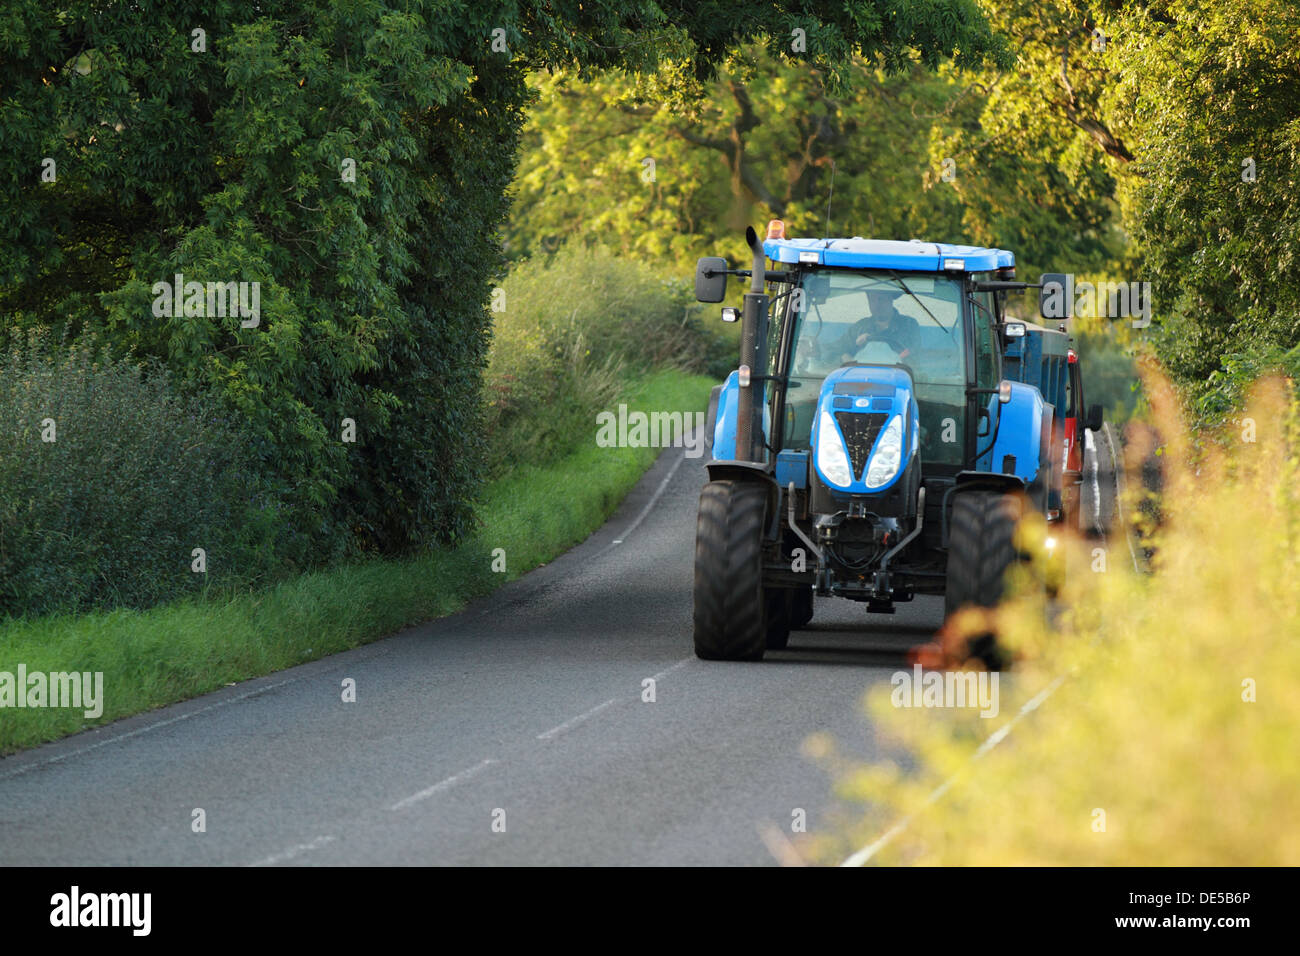 A large tractor travels along a country road taking up a lot of space. Cars can seen seen in the background Stock Photo